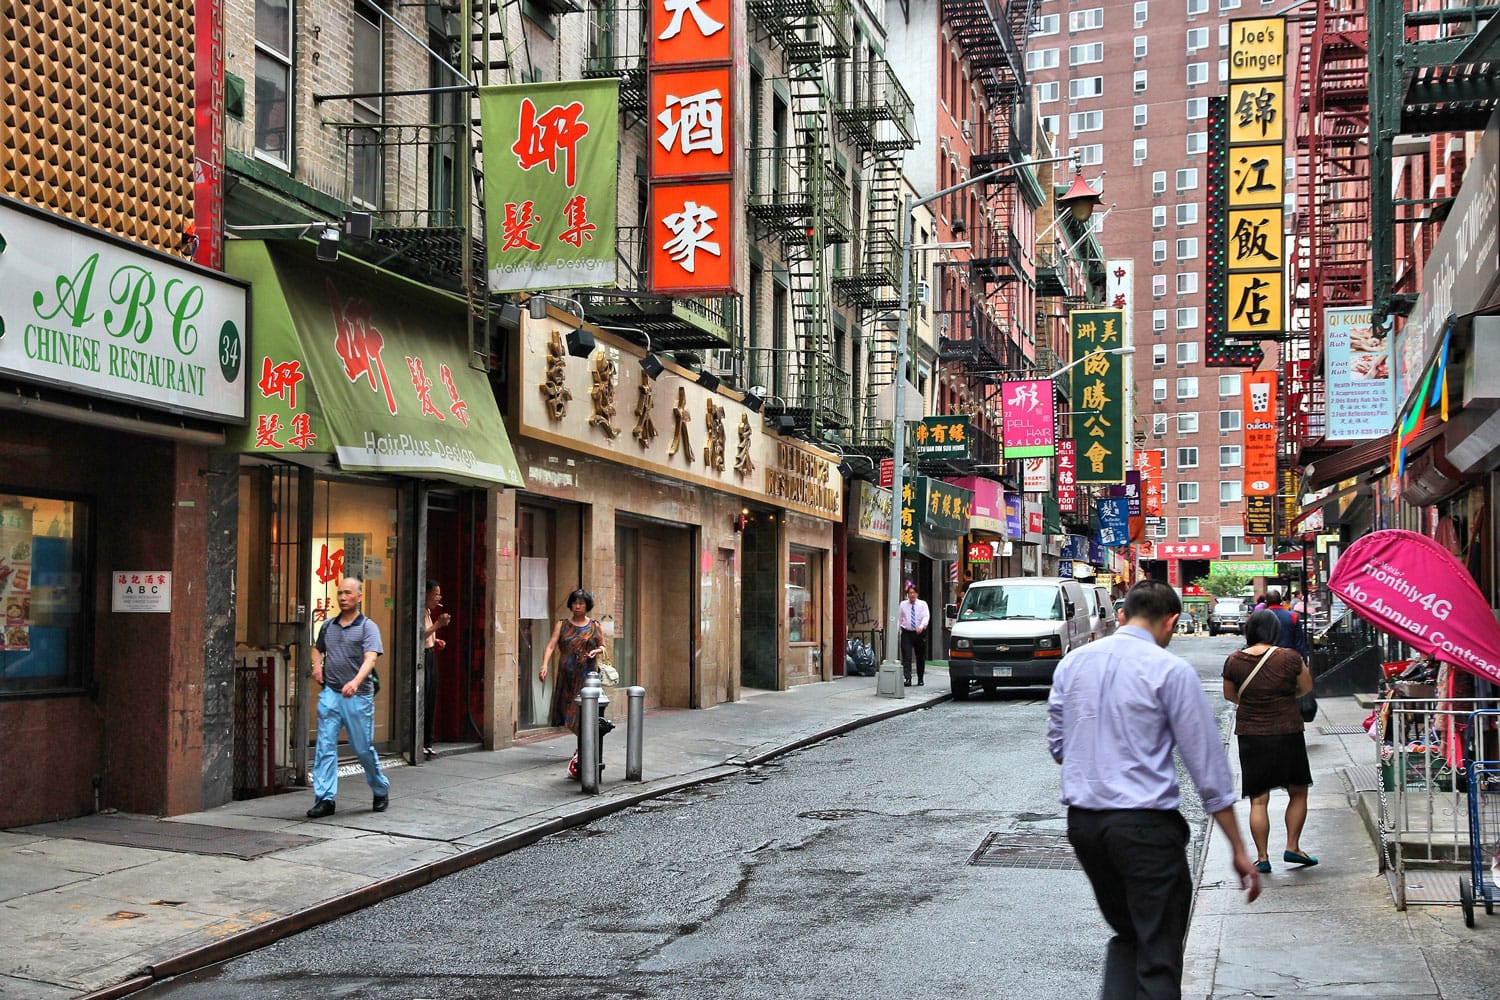 People walking in Chinatown in New York City.